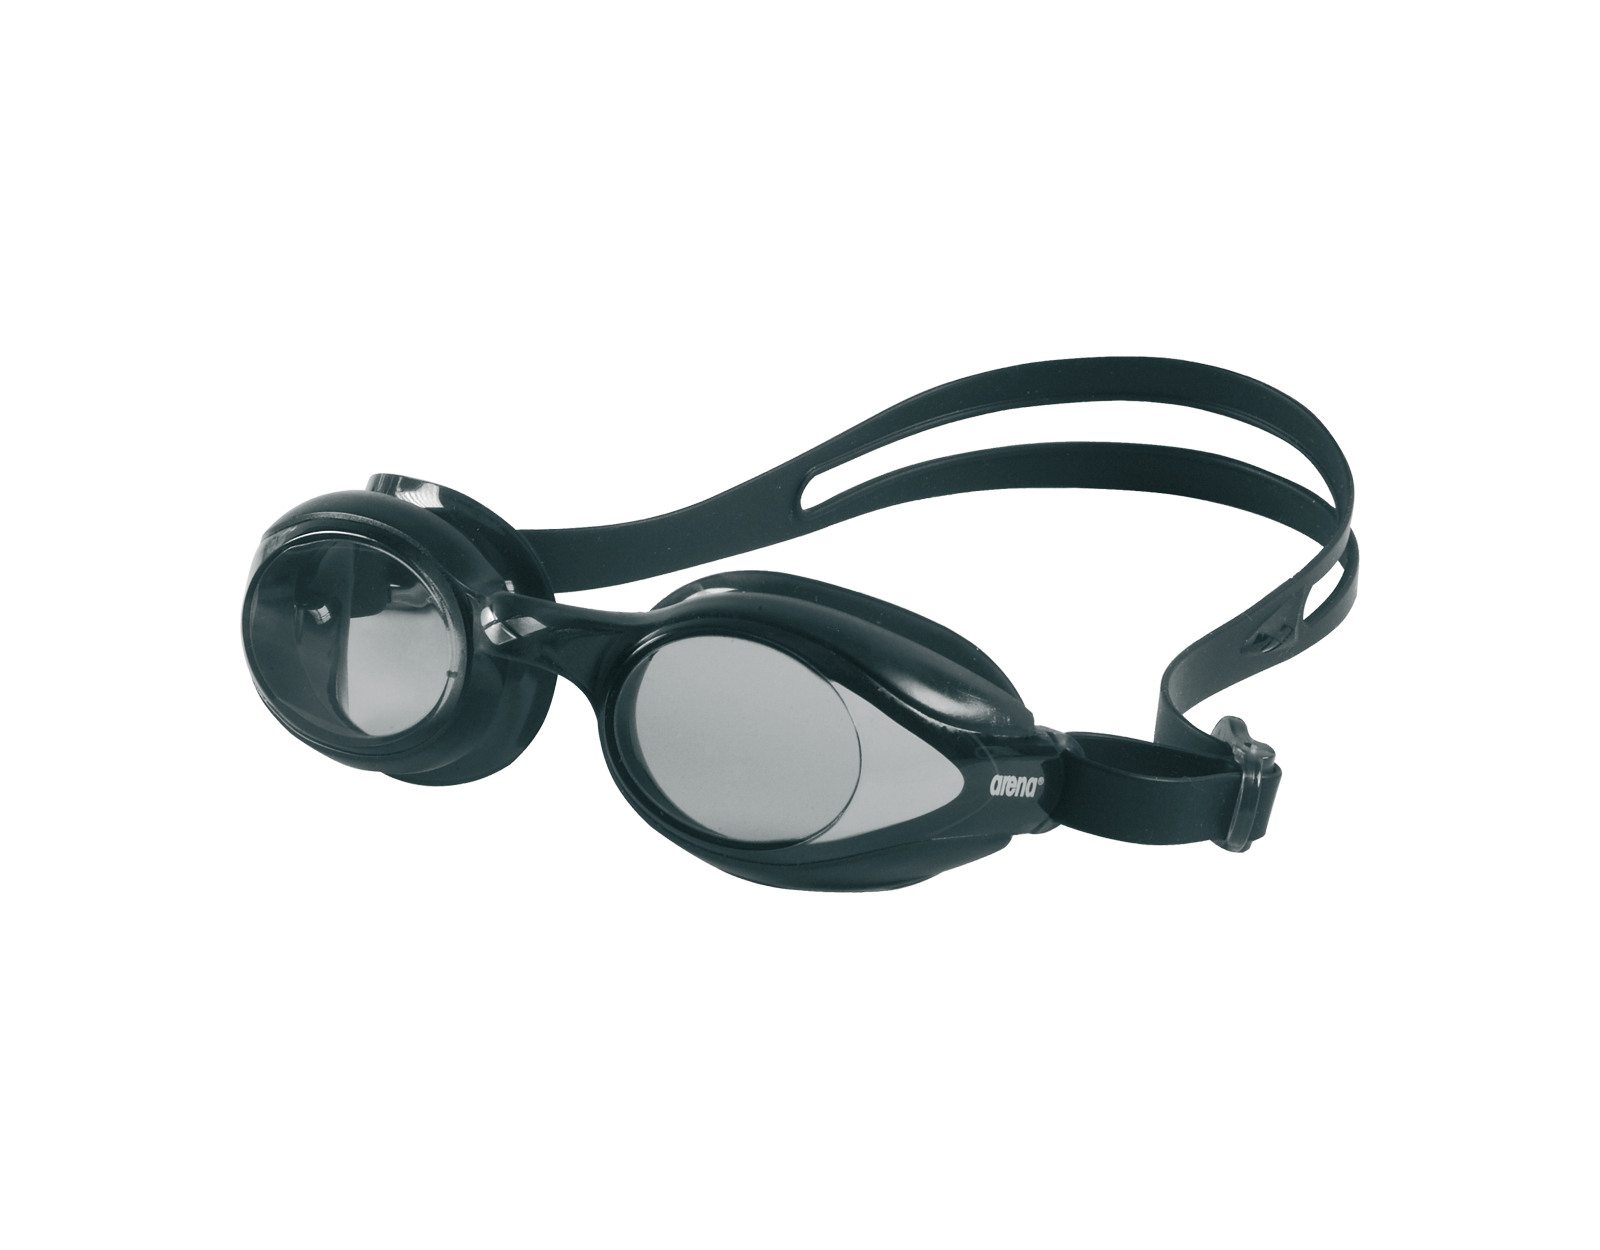 Swimsuit clipart swimming gear. Goggles transparent png pictures